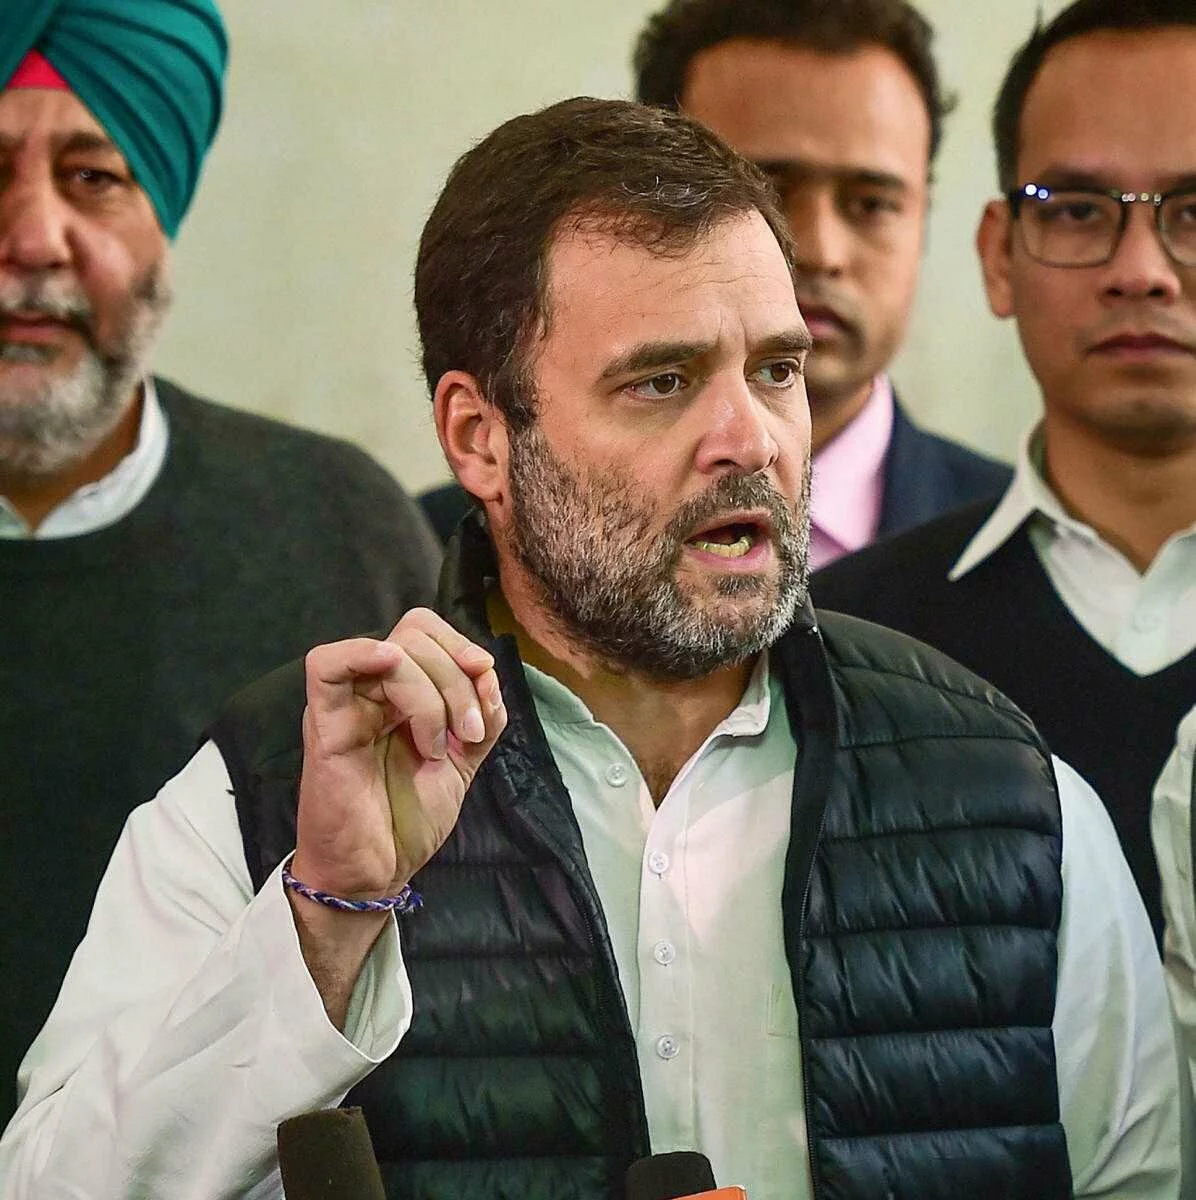 Govt musn't allow foreign interests take control of Indian corporate during coronavirus crisis: Rahul Gandhi